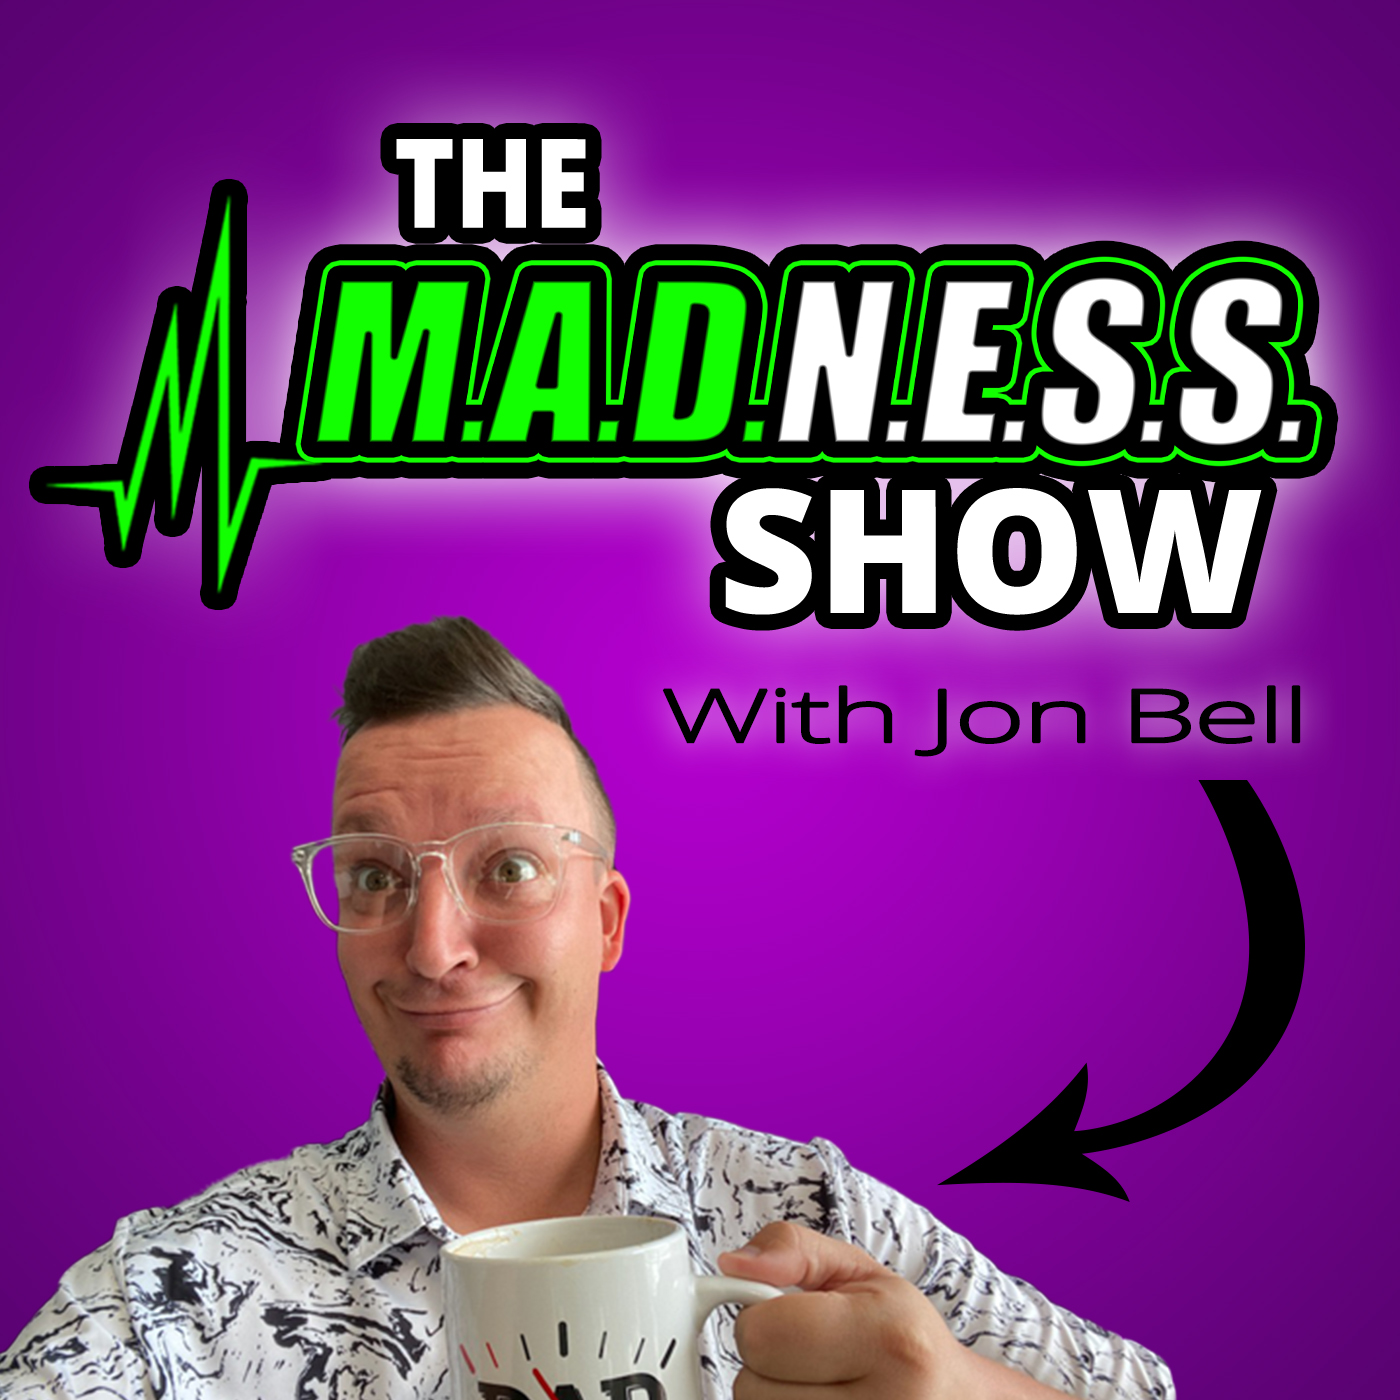 The MADNESS Show